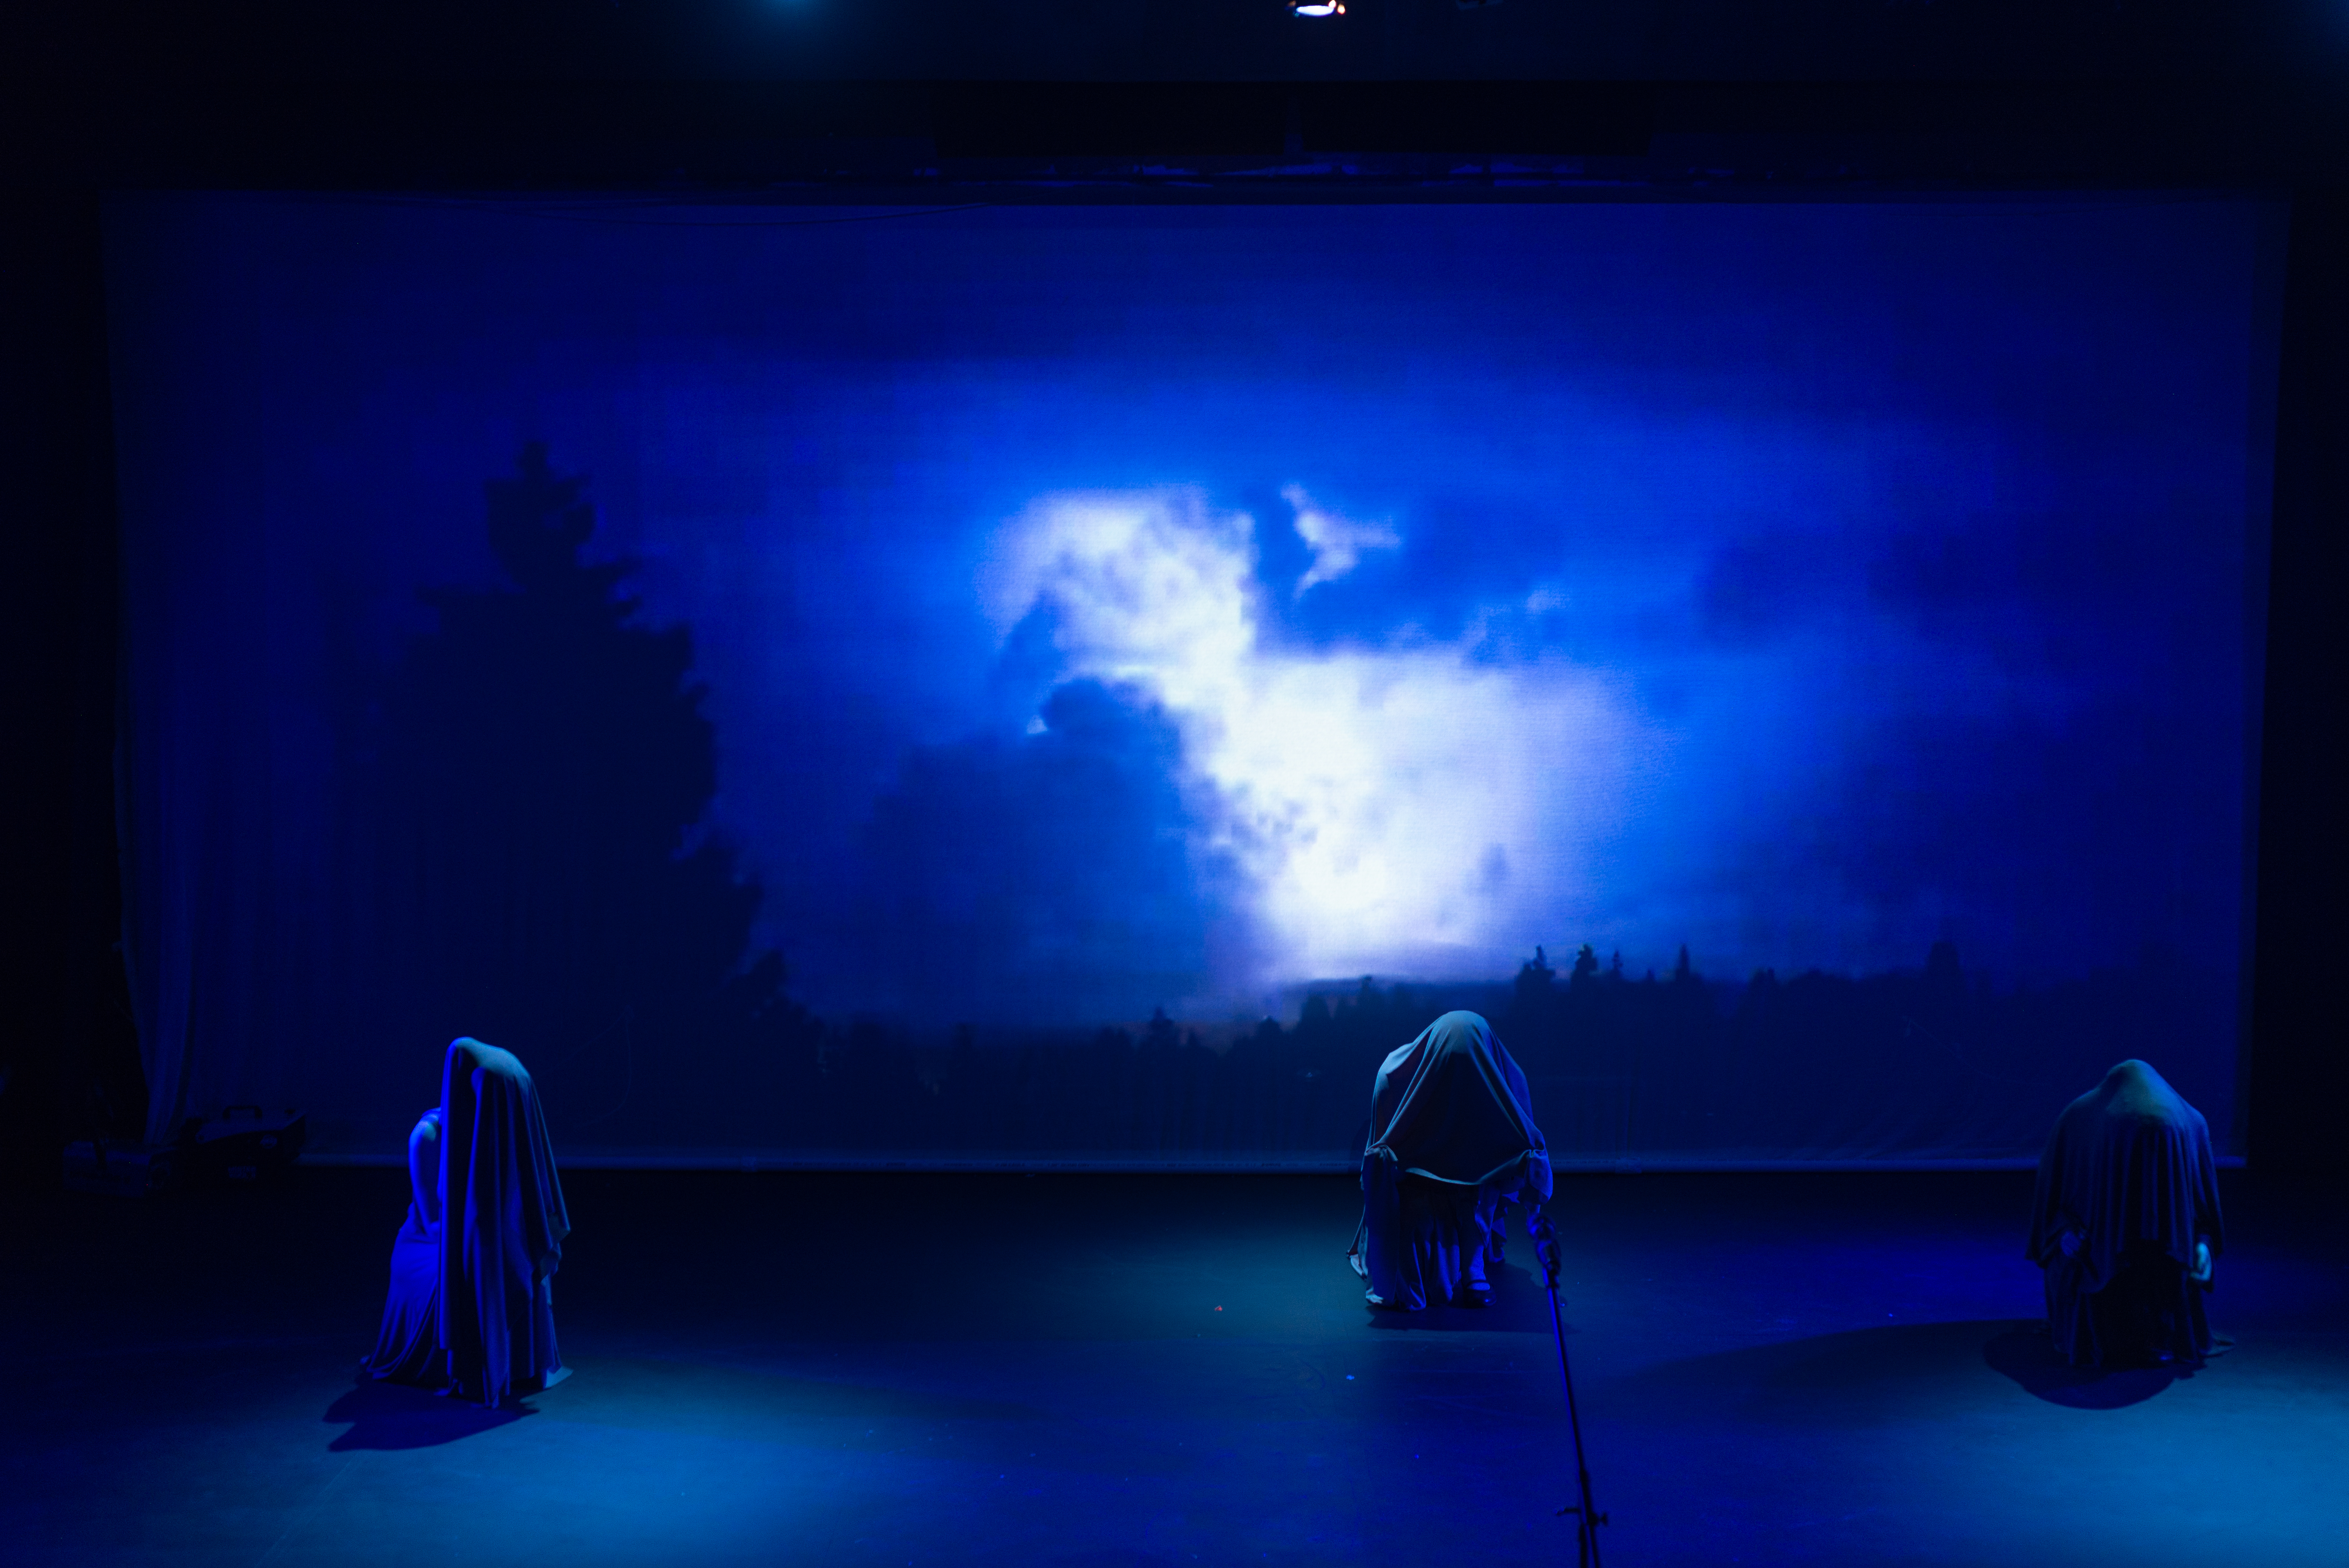 A photograph of the Marran Theater stage during a dress rehearsal of the Oxford Street Players porduction of Macbeth with three witches in front of a screen of blue clouds